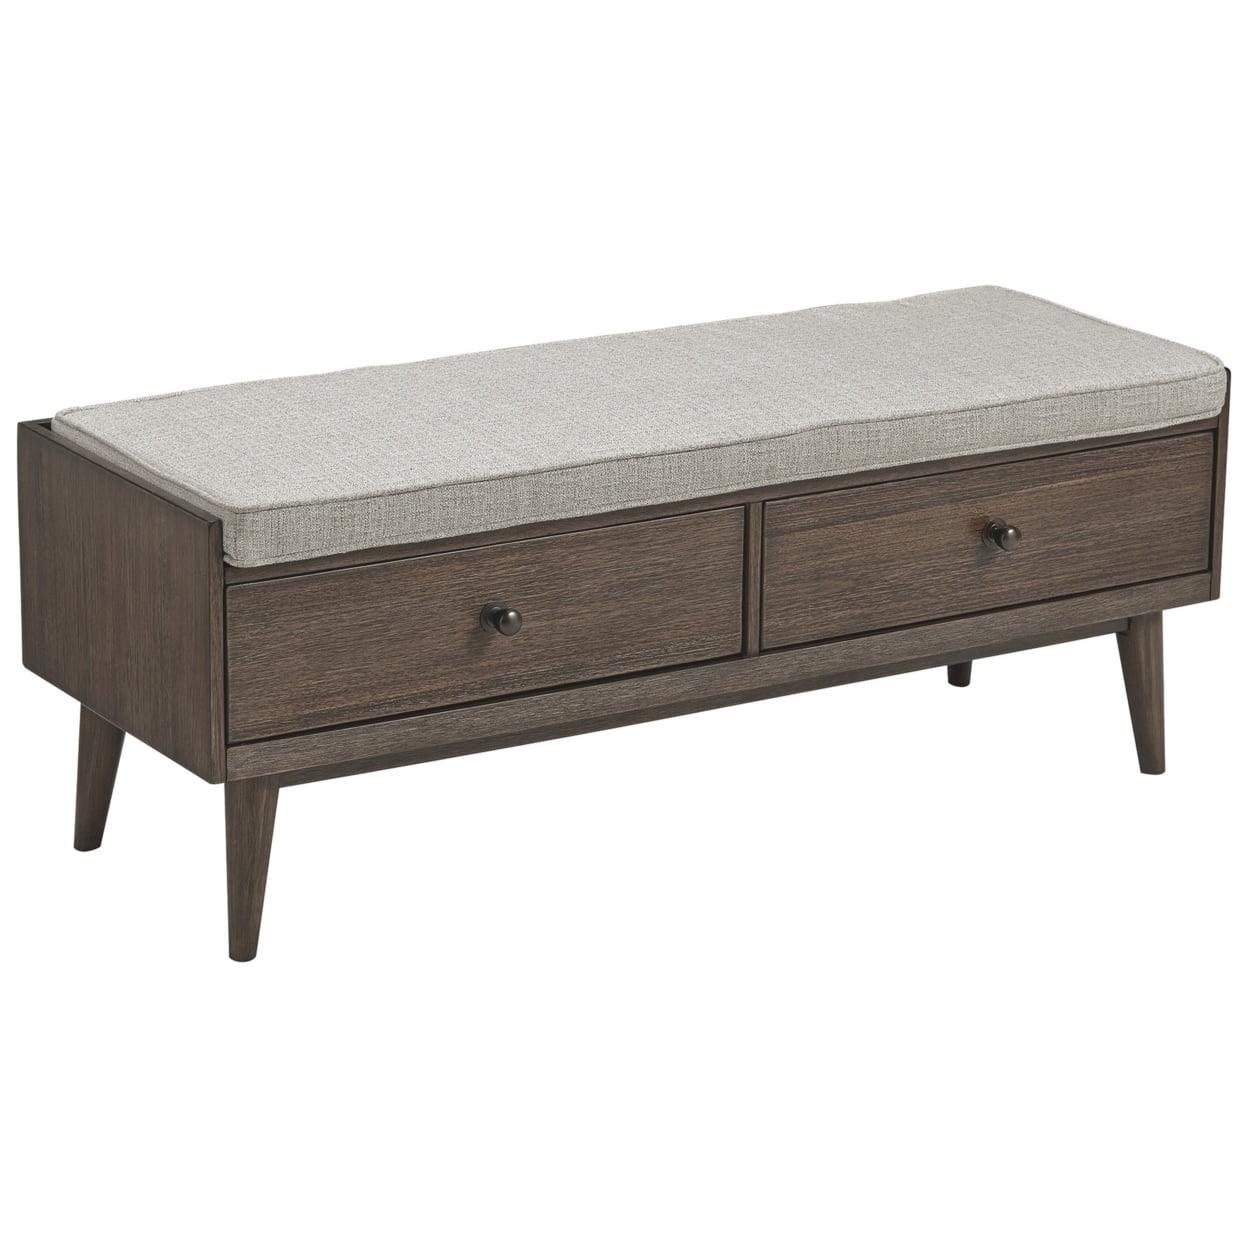 Taupe Brown Wooden Storage Bench with Reversible Fabric Seat and 2 Drawers